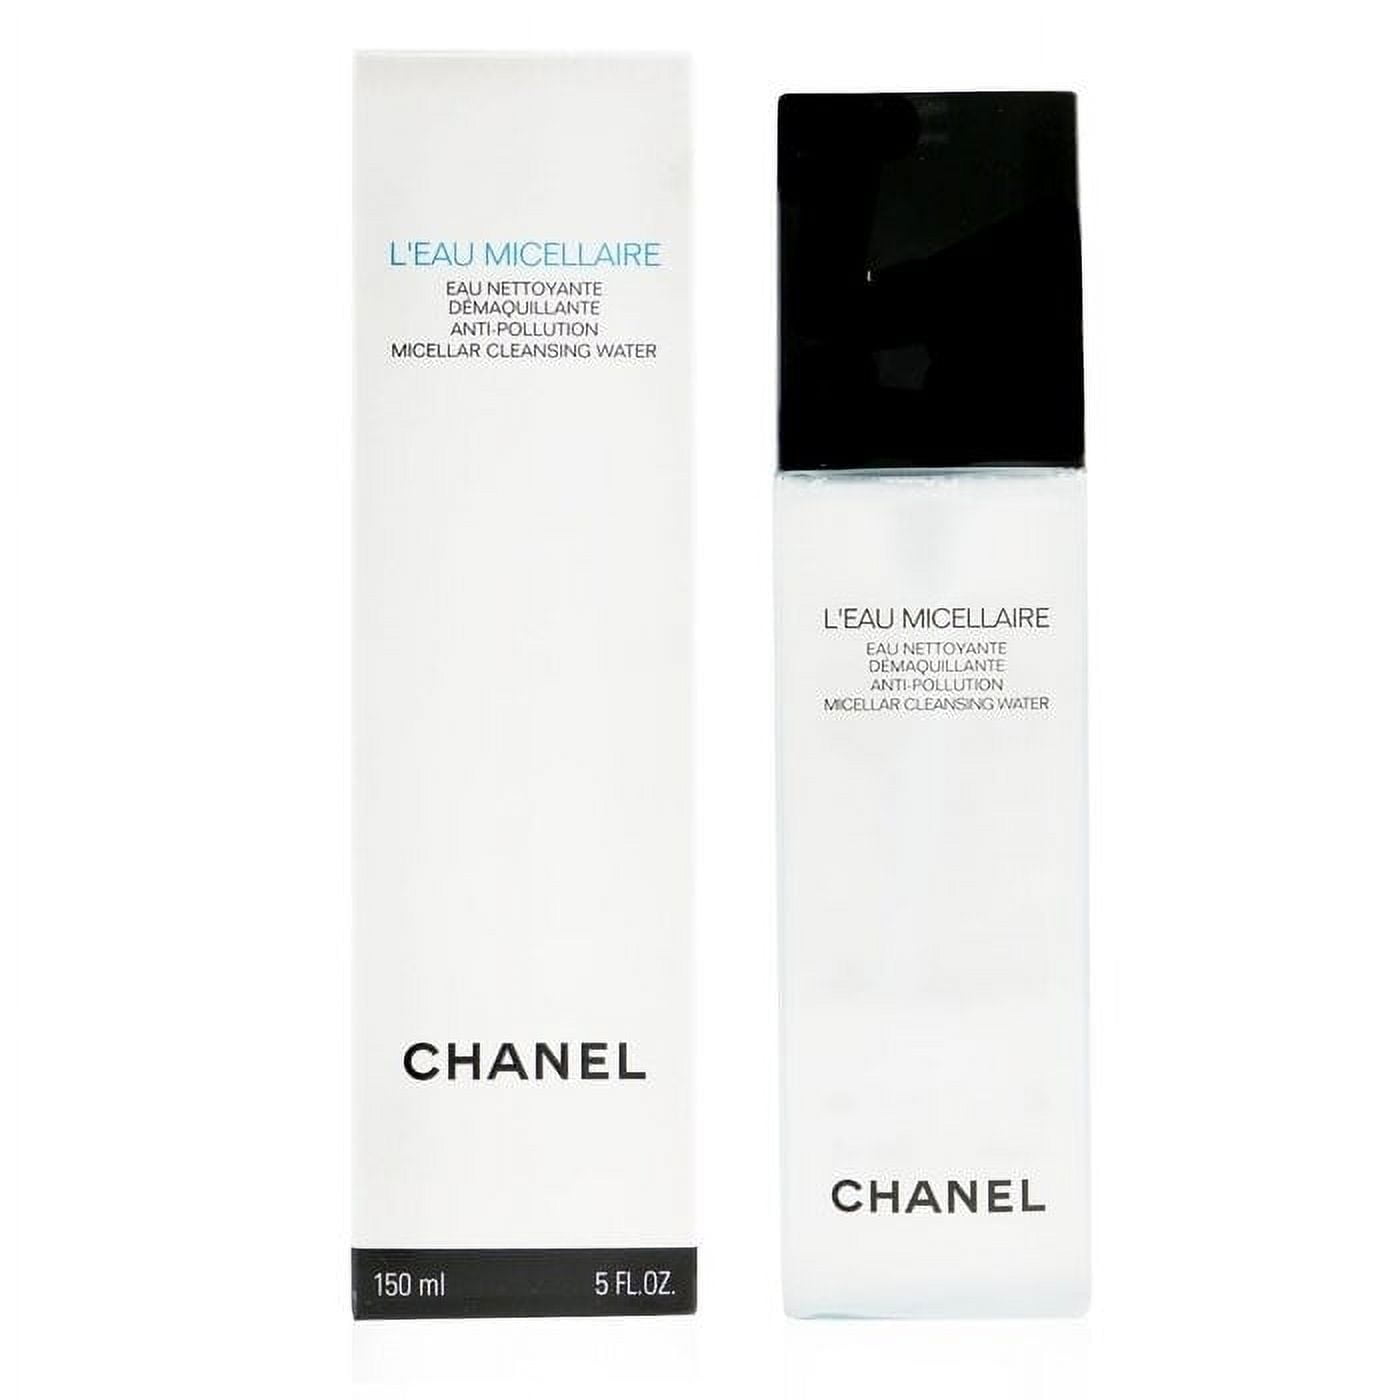 CHANEL l'eau micellaire Anti-Pollution Micellar Cleansing Water 10ml